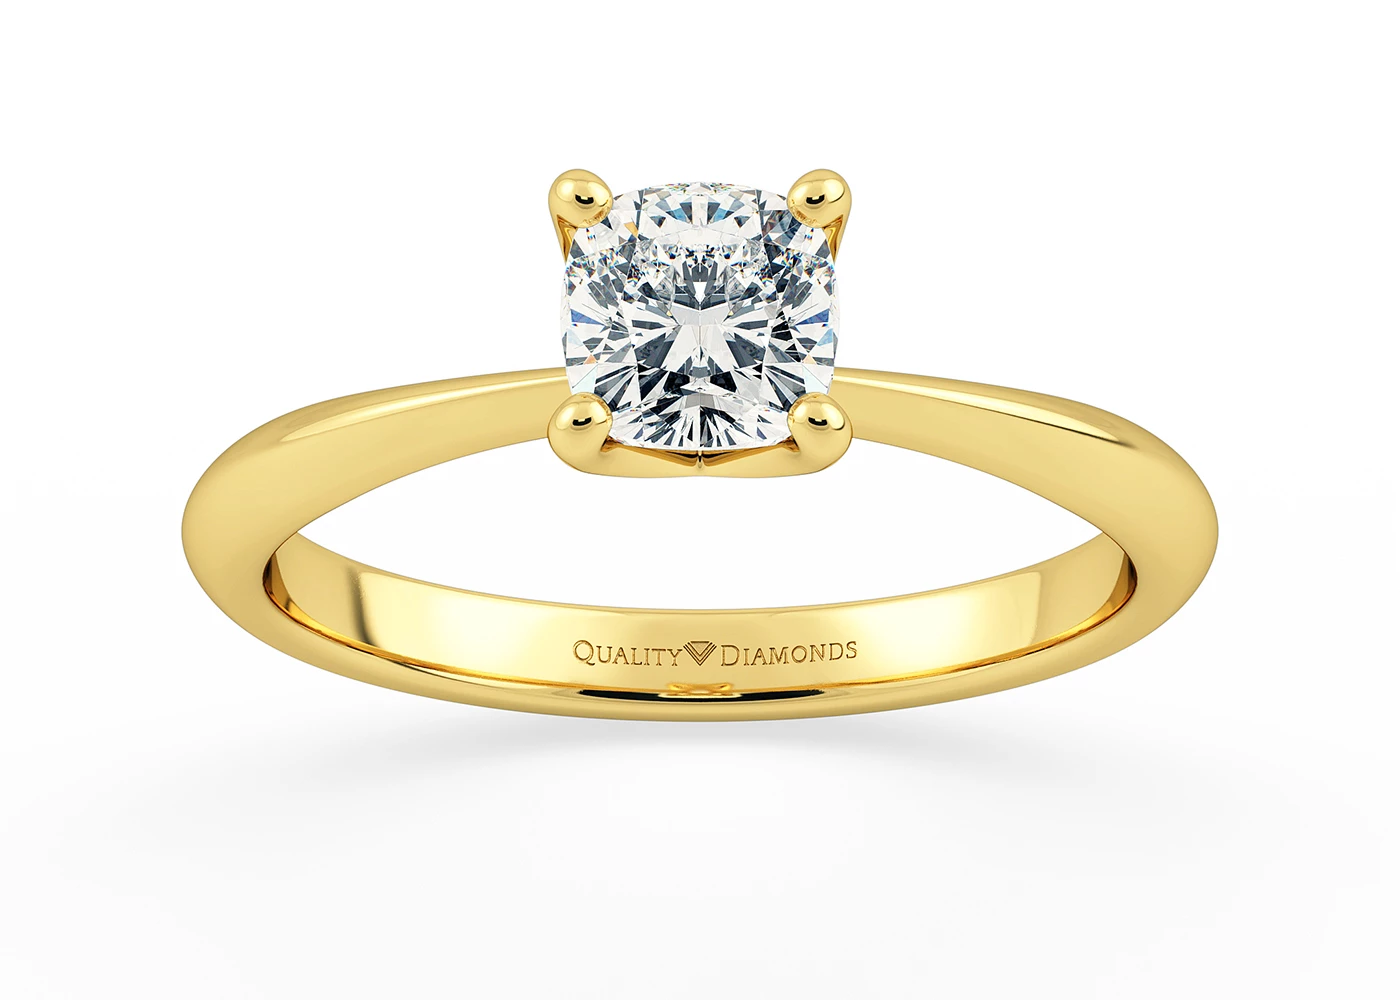 Half Carat Cushion Solitaire Diamond Engagement Ring in 18K Yellow Gold